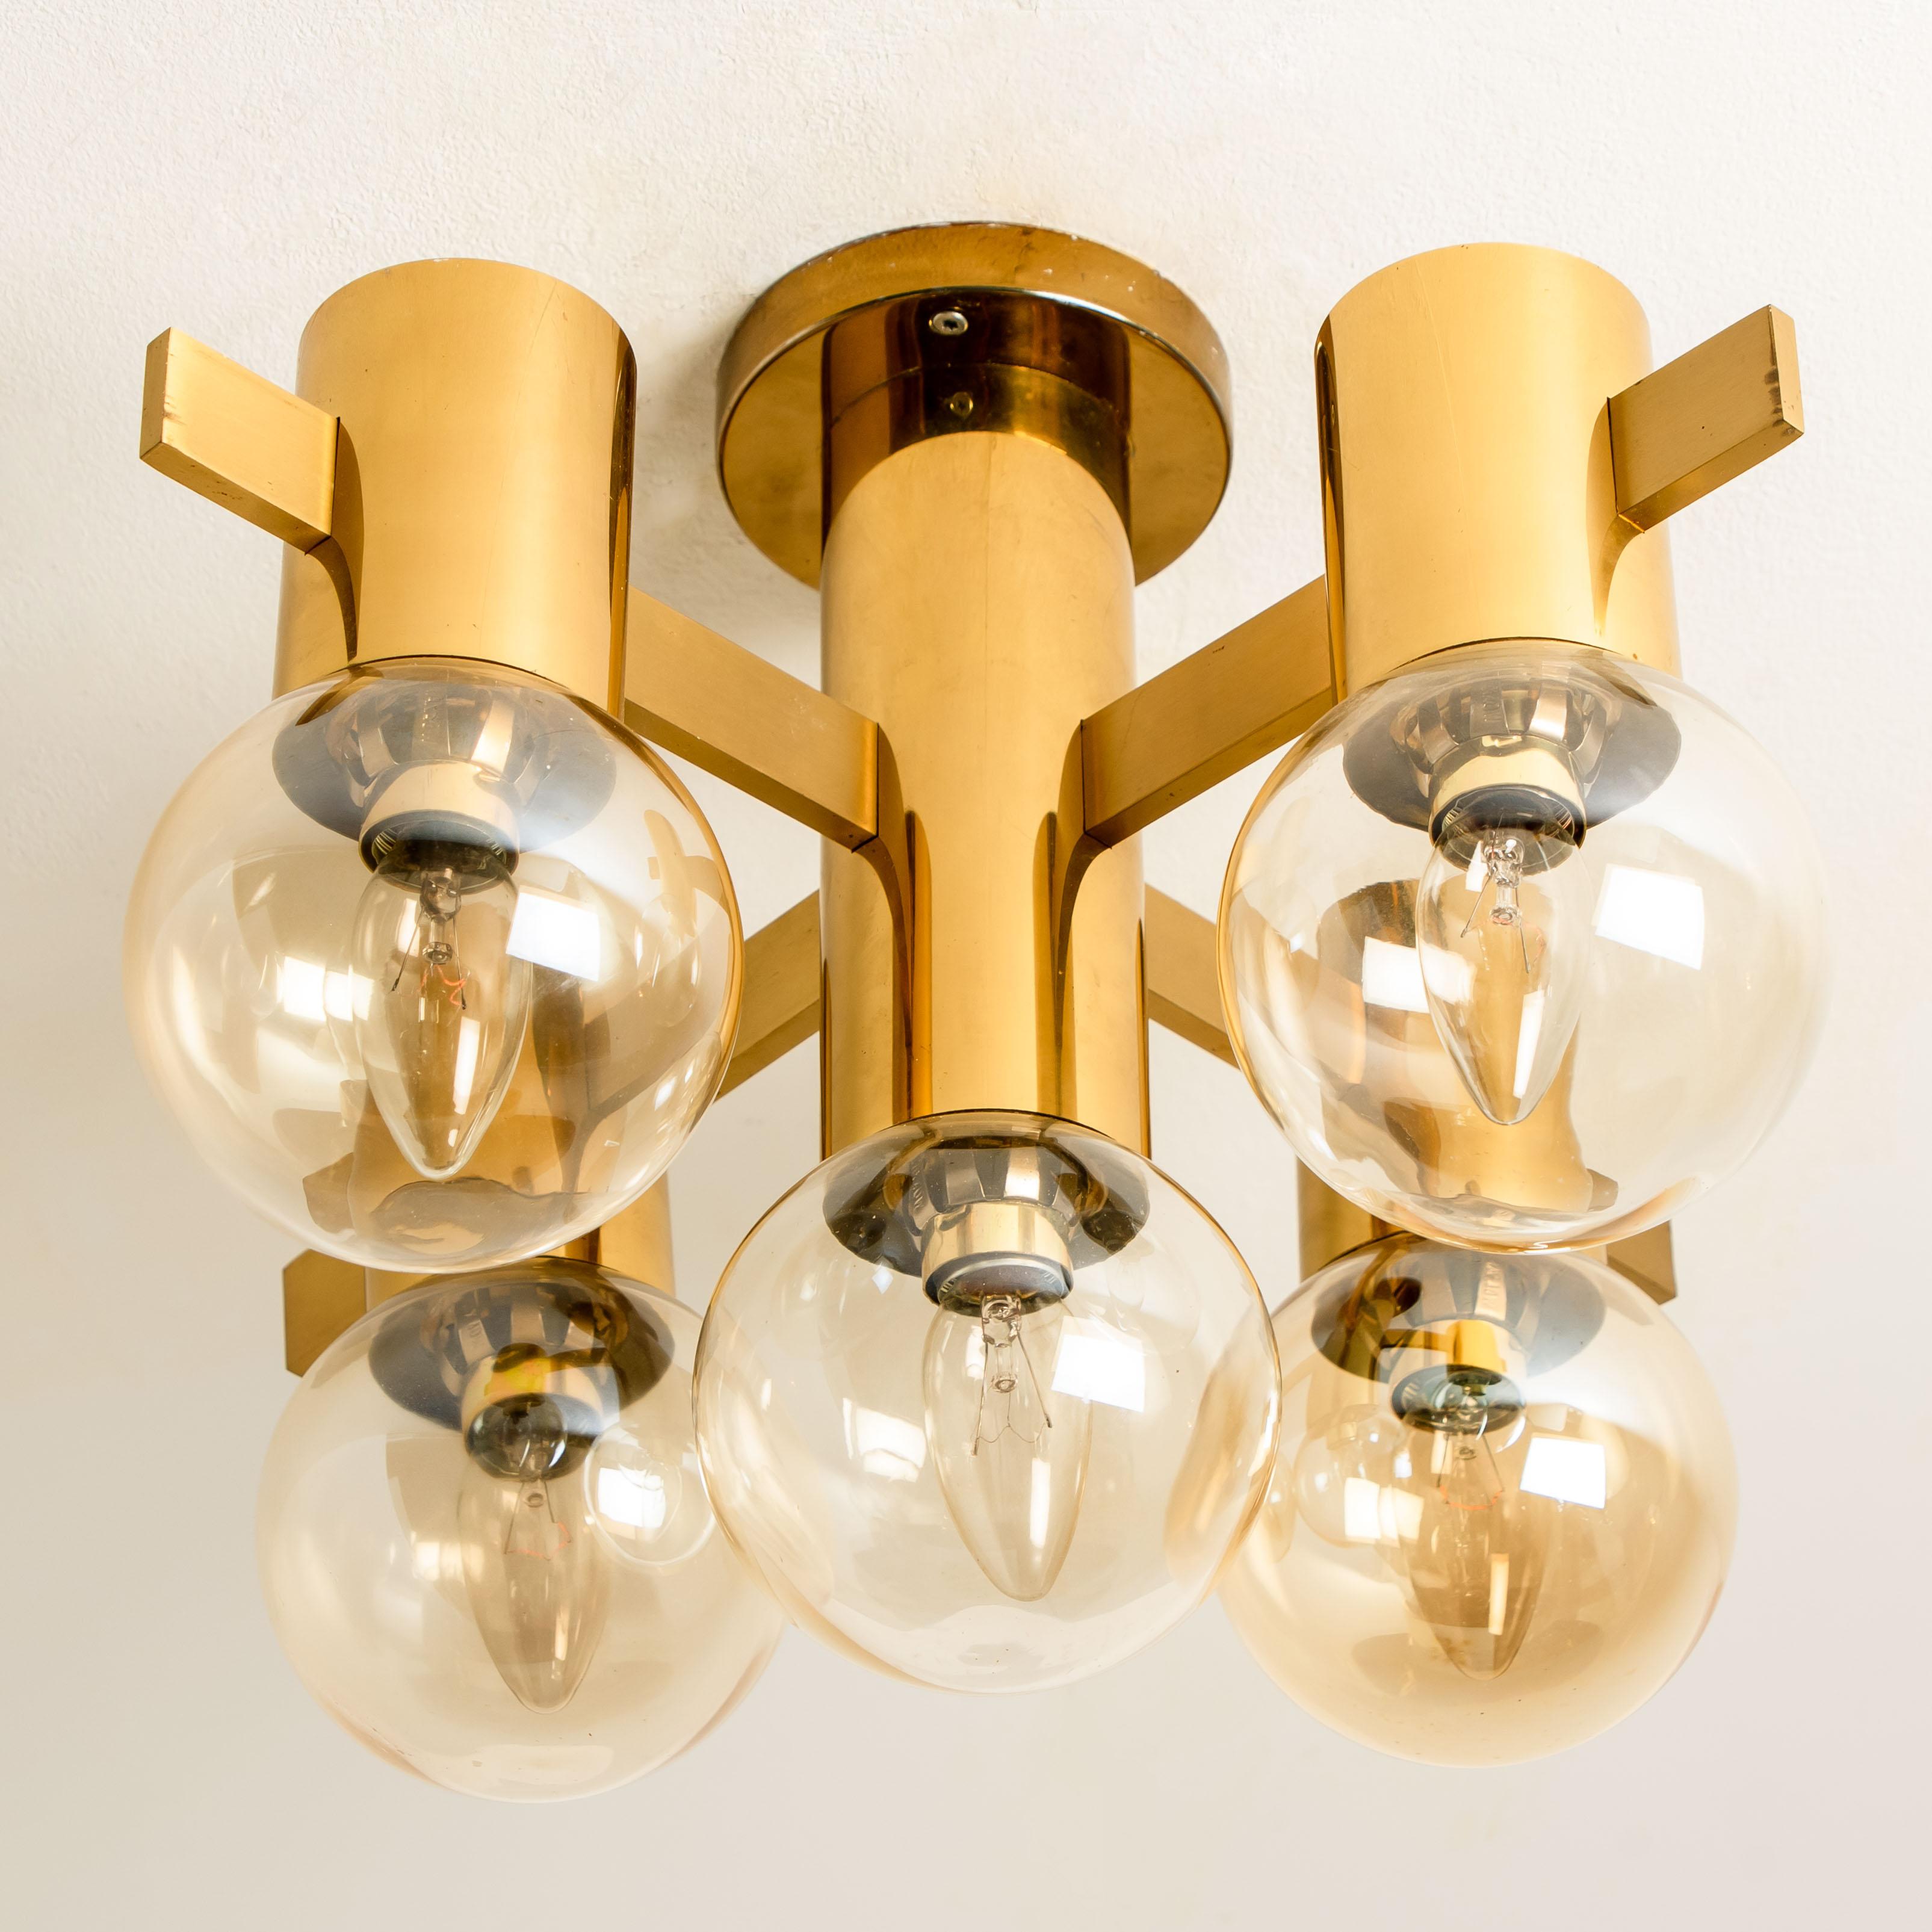 Mid-20th Century Pair of Brass and Glass Light Fixtures in the Style of Jakobsson, 1960s For Sale